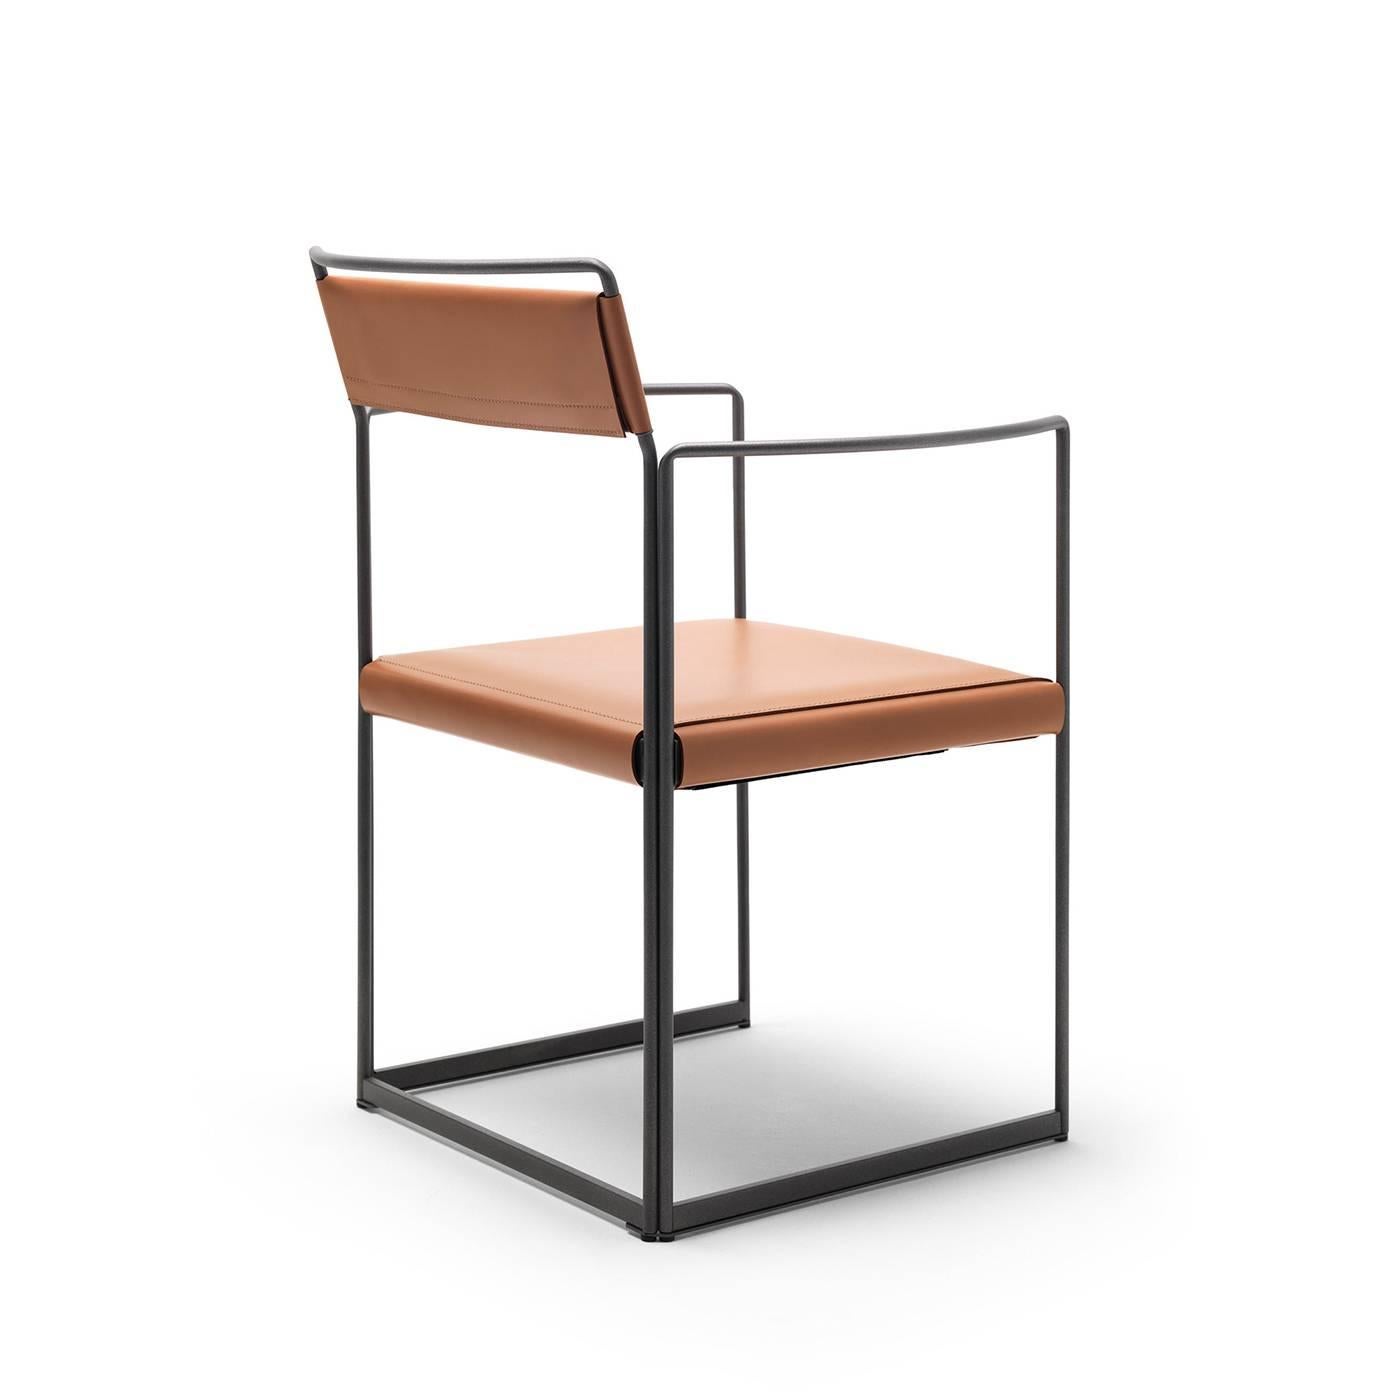 The elegant and contemporary design of this chair by Alberto Colzani (2017) combines form and function while using minimum material. The grey-painted steel rods of the frame outline the shape of the piece with slender lines that make it light and